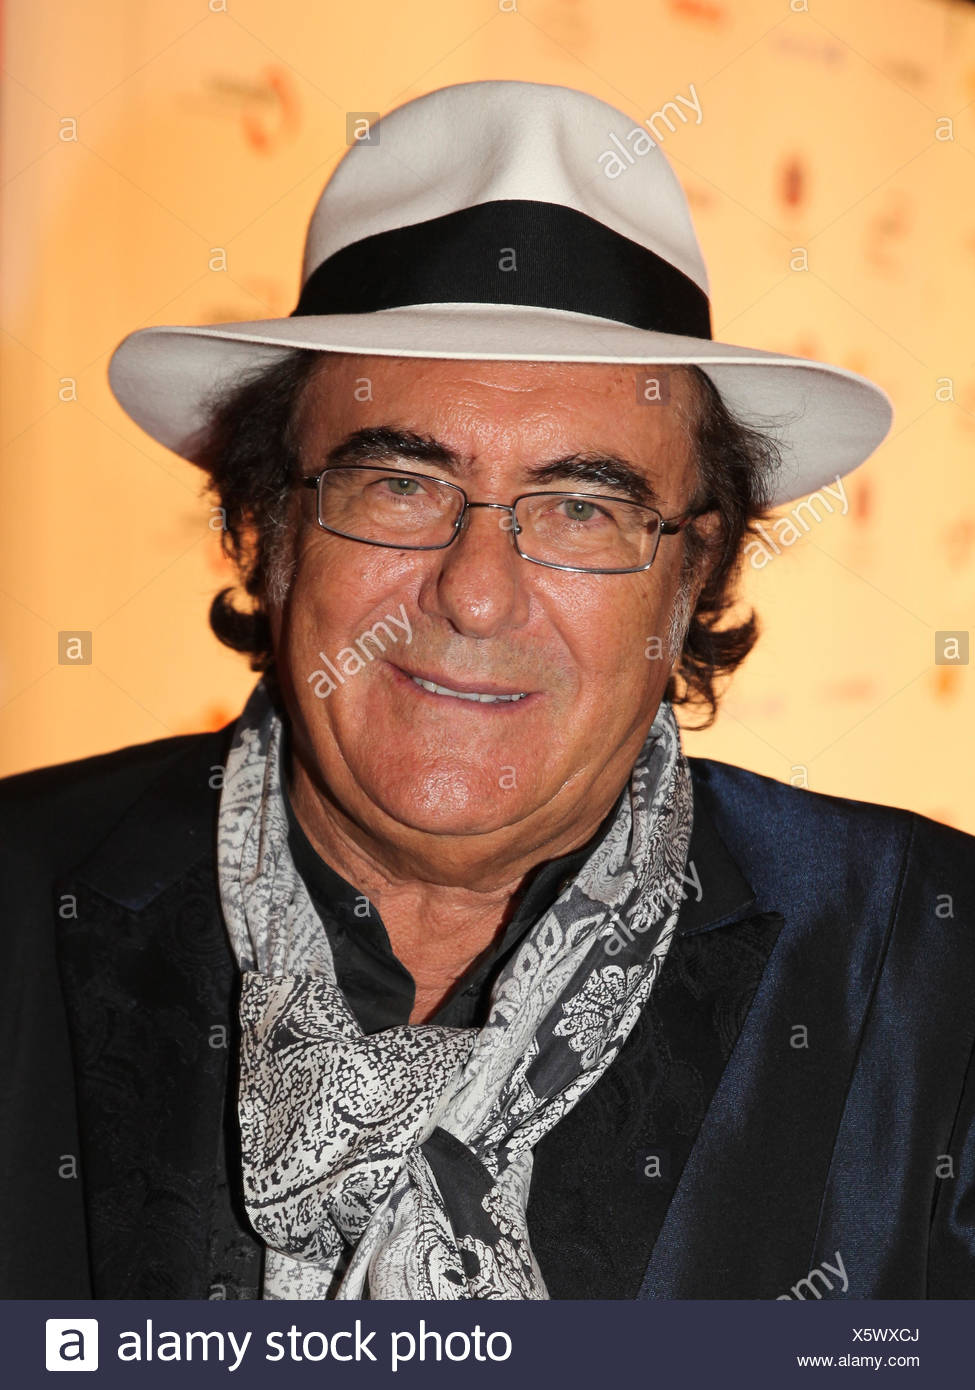 Albano - Al Bano Icon Of Italian Music Will Be On Stage At Forte Arena ...